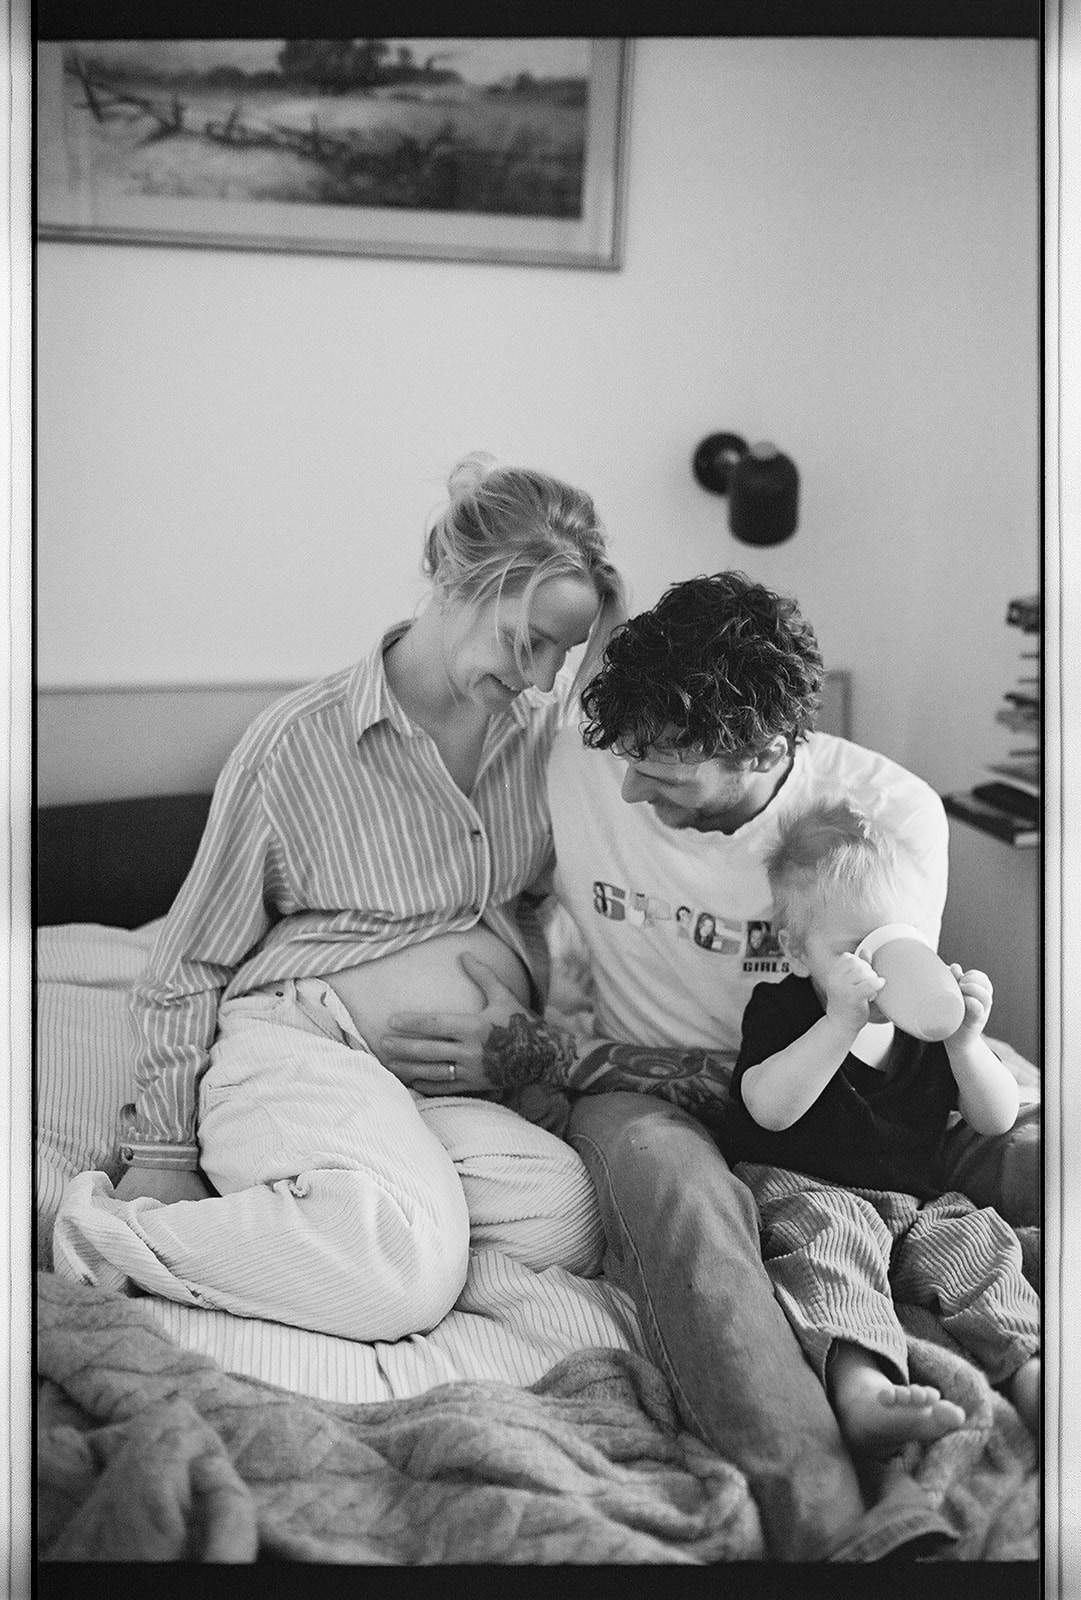 kelowna family film and documentary family photography at home, 35mm film, maternity, pancakes, cuddles,